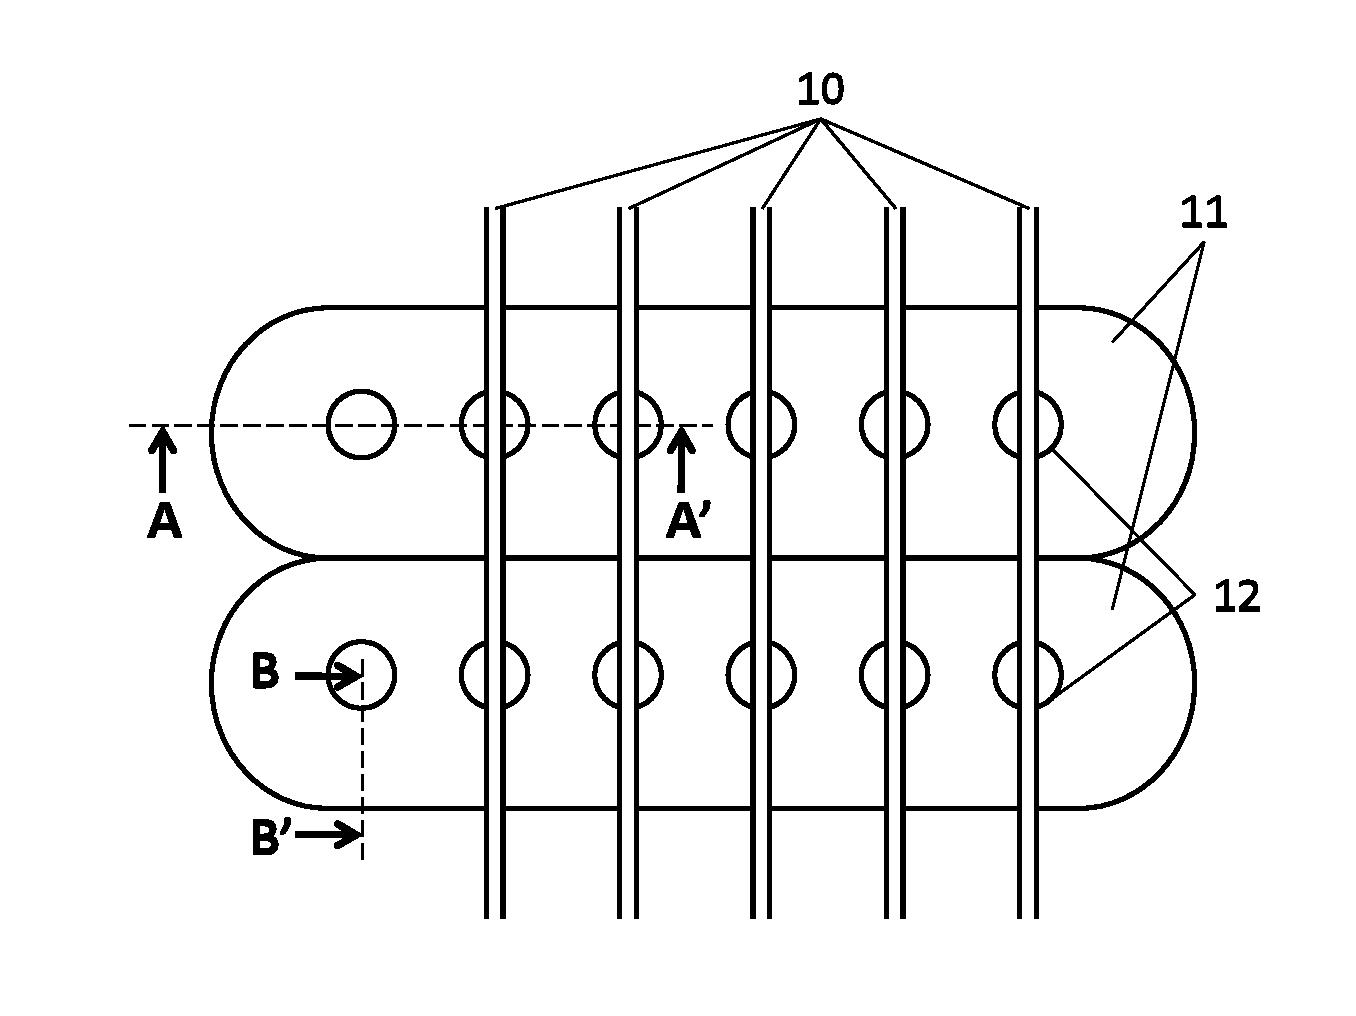 Electromagnetic pickup with multiple wire coils wound around individual pole sets to attain multiple tones